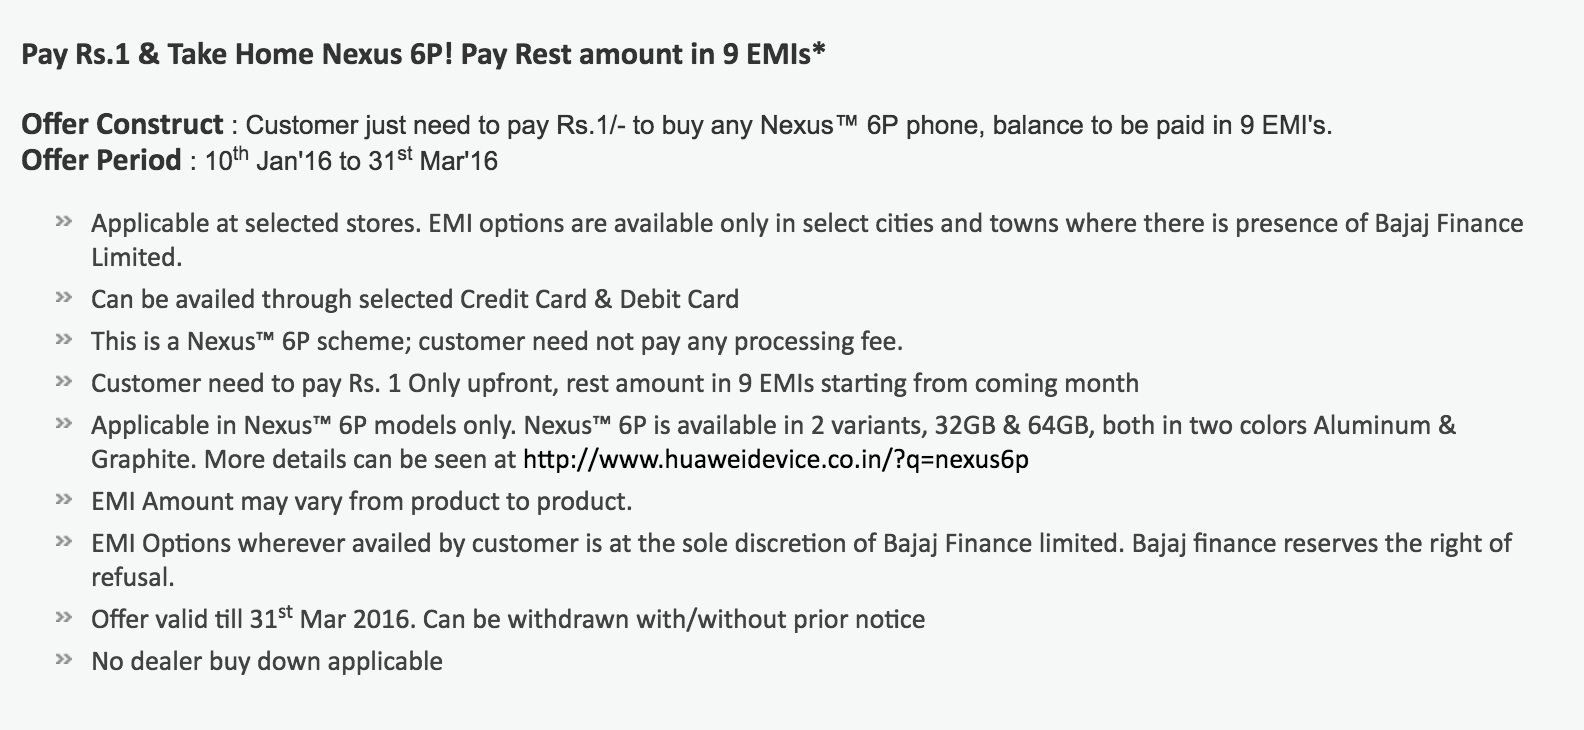 Buy Nexus 6P for Re 1 and Pay Remaining in EMI - Gadgets To Use